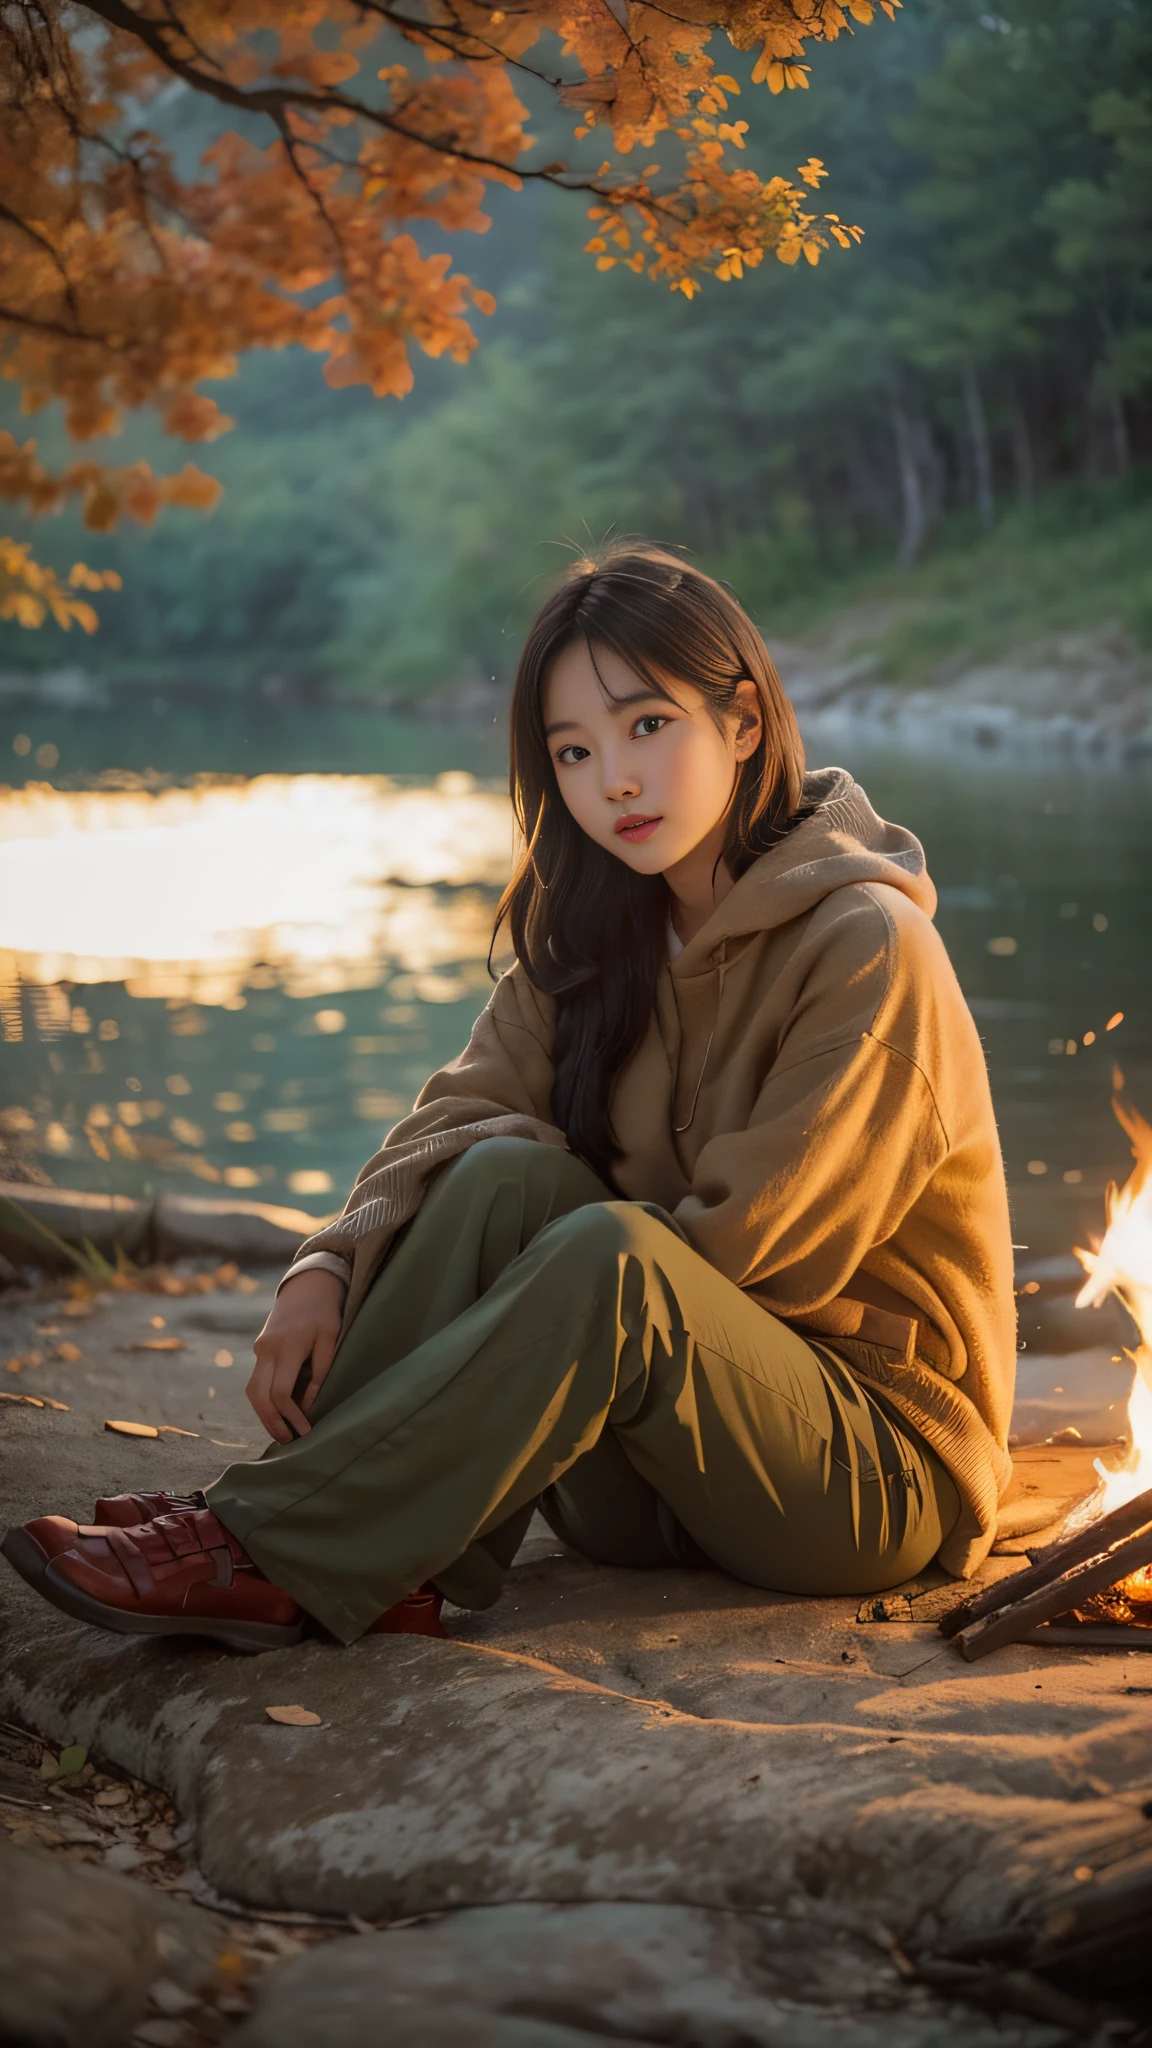 Please generate a realistic photograph of a beautiful 19-year-old Korean woman sitting by a campfire near a riverbank during twilight. The warm light from the campfire should illuminate her face and surroundings. She is sitting on a foldable chair, unaware of being photographed. Her beauty resembles that of a Korean idol or a martial arts actress, creating a captivating and almost fantastical atmosphere in the photo.

She is wearing a white jersey, and beneath it, she is not wearing anything else. Her proportions are approximately 9:1, giving her a tall and slender appearance. She has a short bob hairstyle, and her hair appears slightly brownish due to the fire's reflection. Her expression should be natural, reflecting the tranquility of the moment by the campfire.

Please ensure that the composition of the photograph captures the serene ambiance of the campfire scene, with the river and nature in the background, and the warm, soft light from the fire highlighting her features and the environment around her.